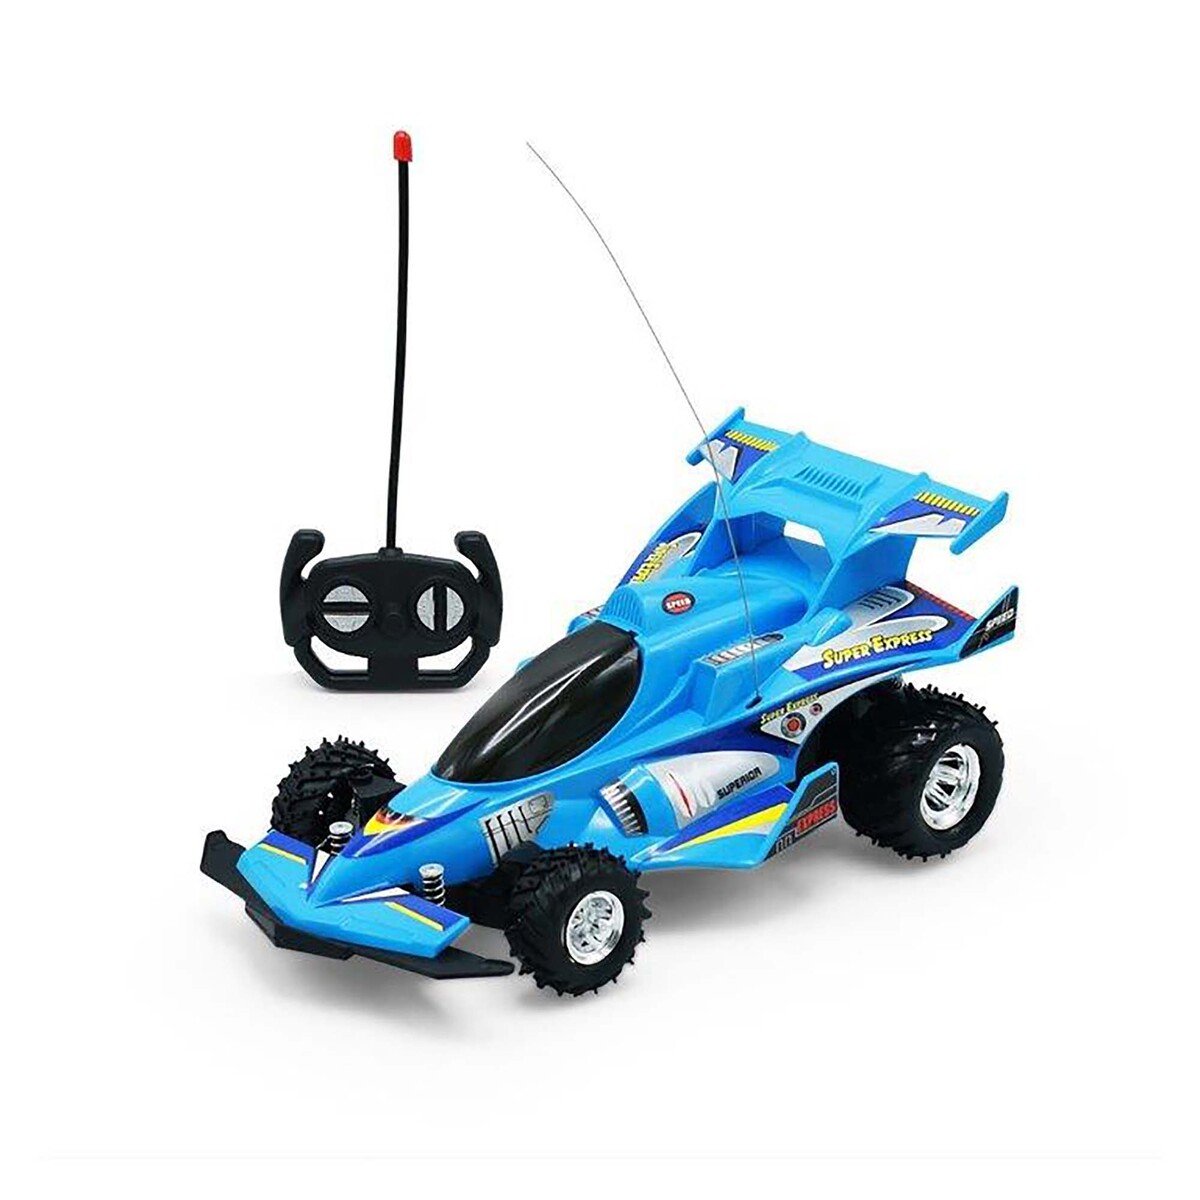 Model Remote Control X Gallop Real Racing Cross Country Race Car 1026 Assorted Color